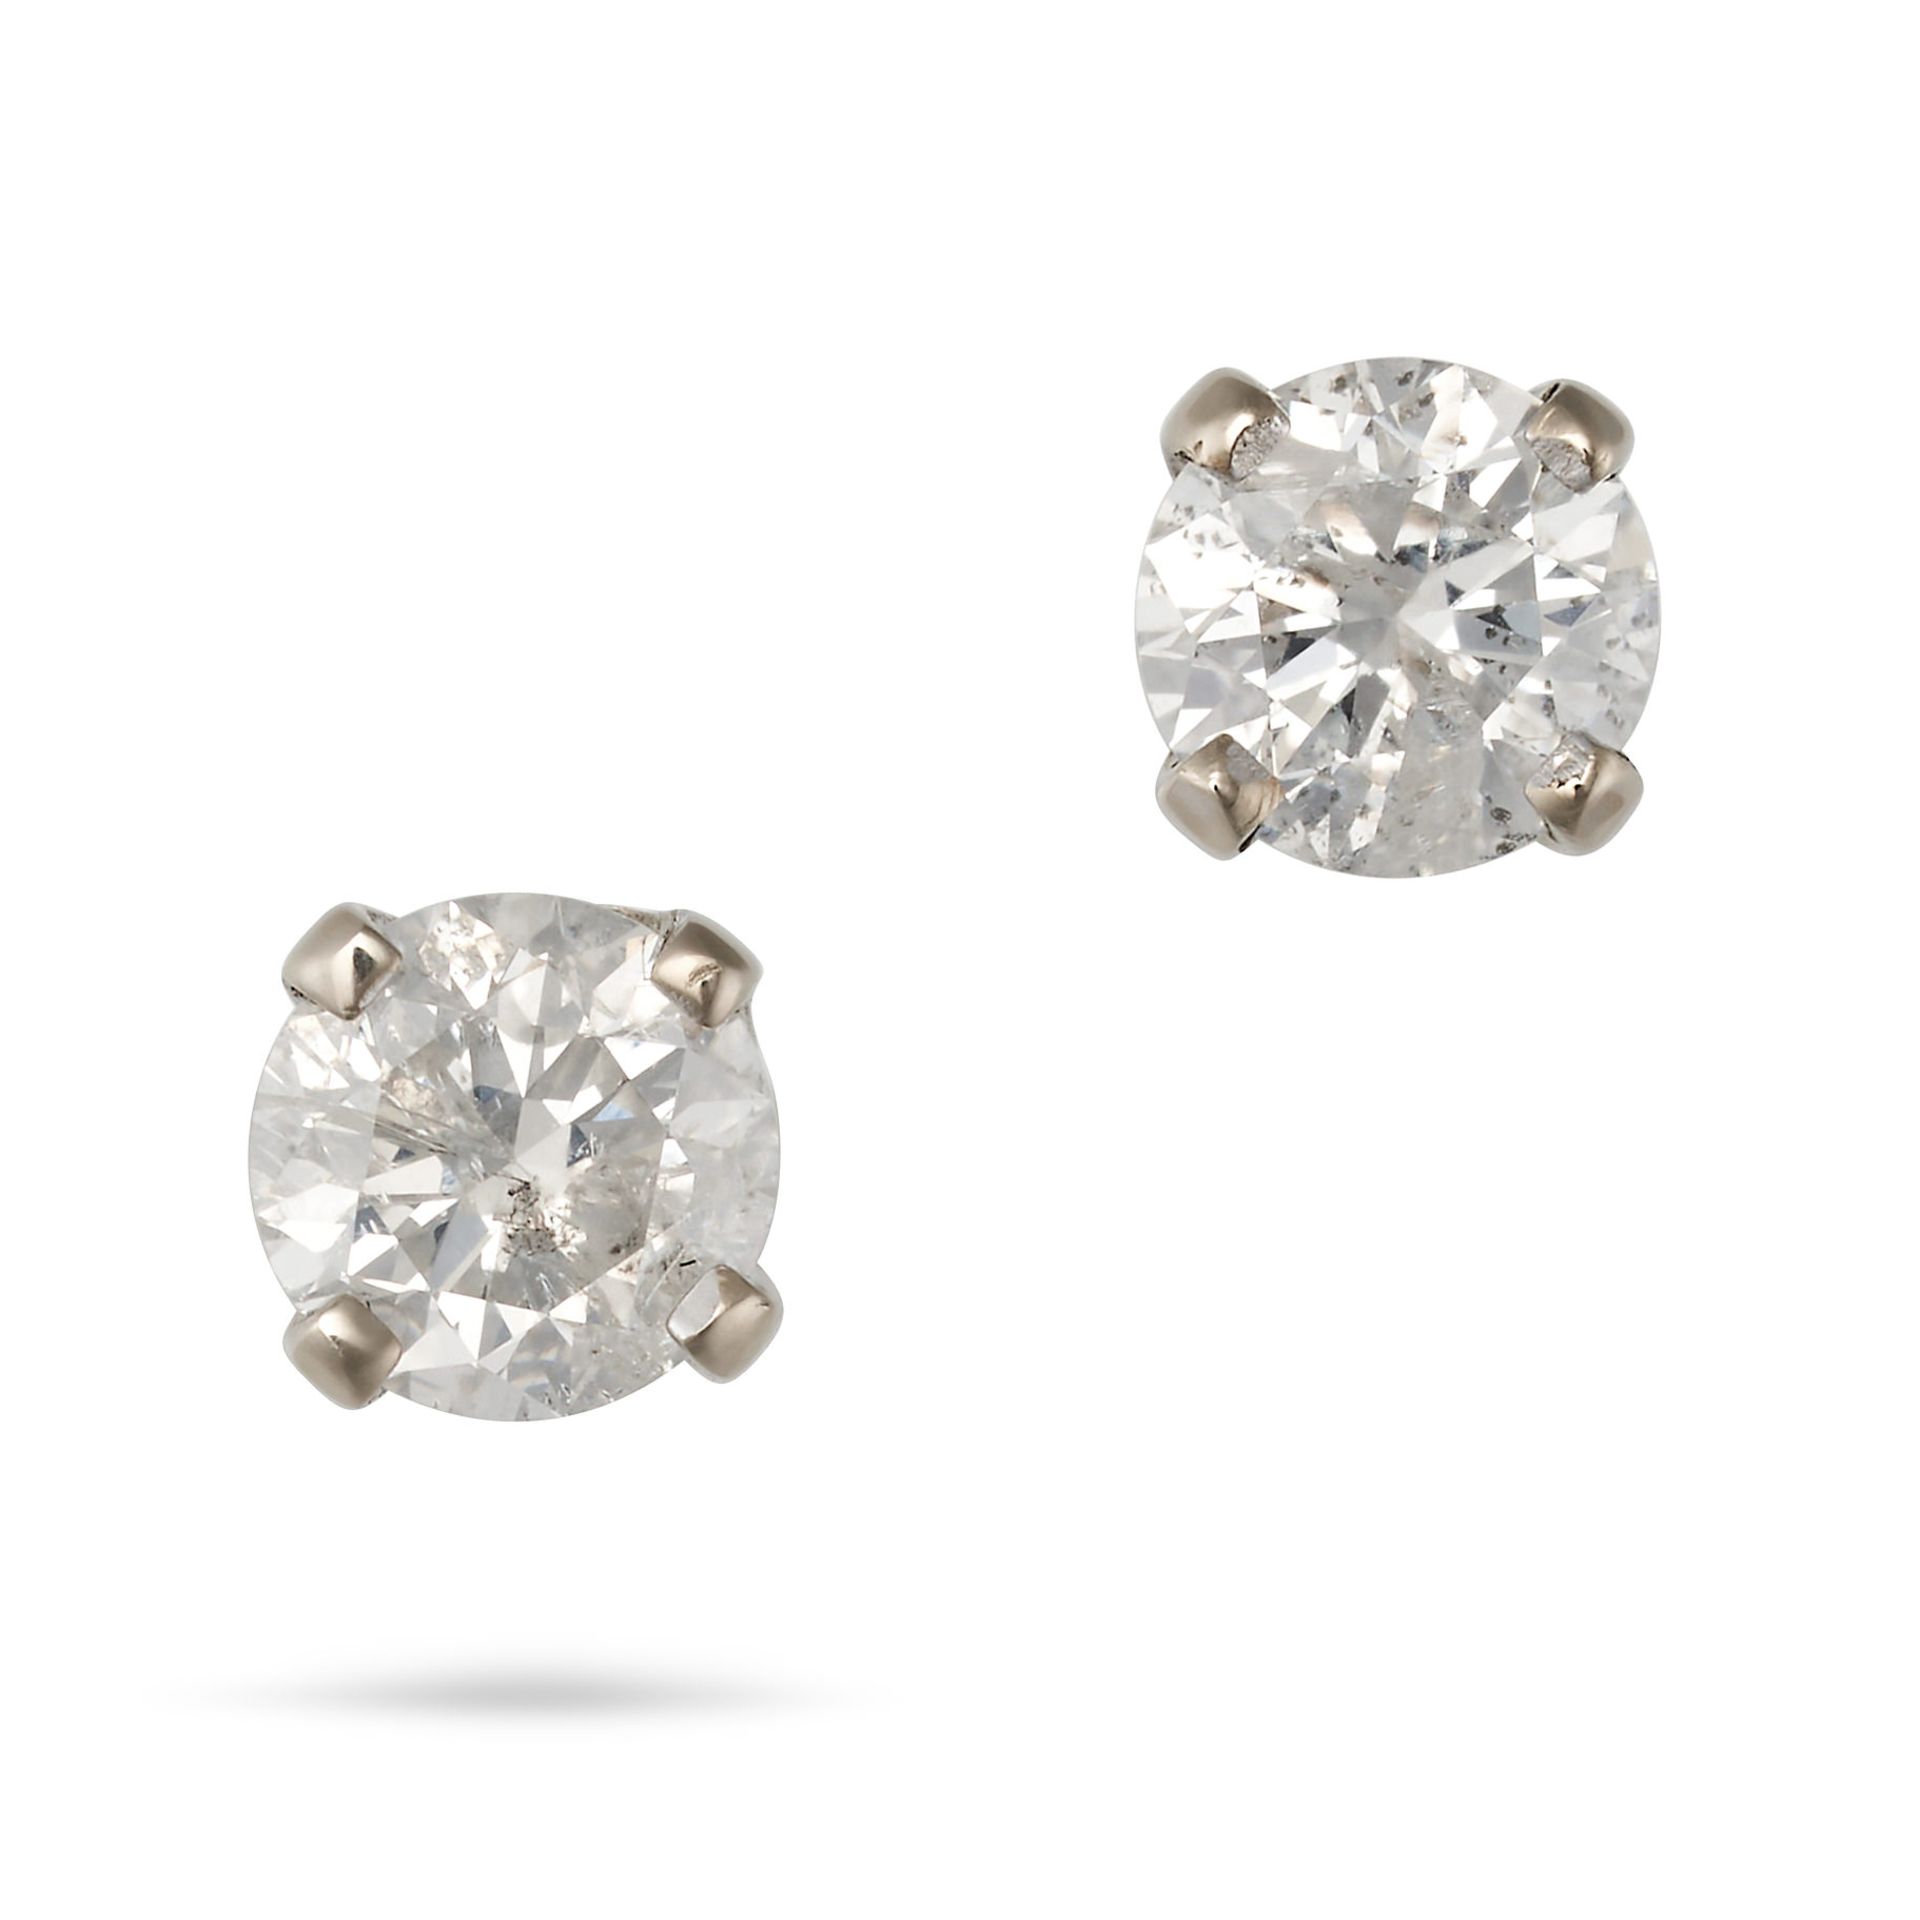 A PAIR OF DIAMOND STUD EARRINGS in white gold, each set with a round brilliant cut diamond, butte...